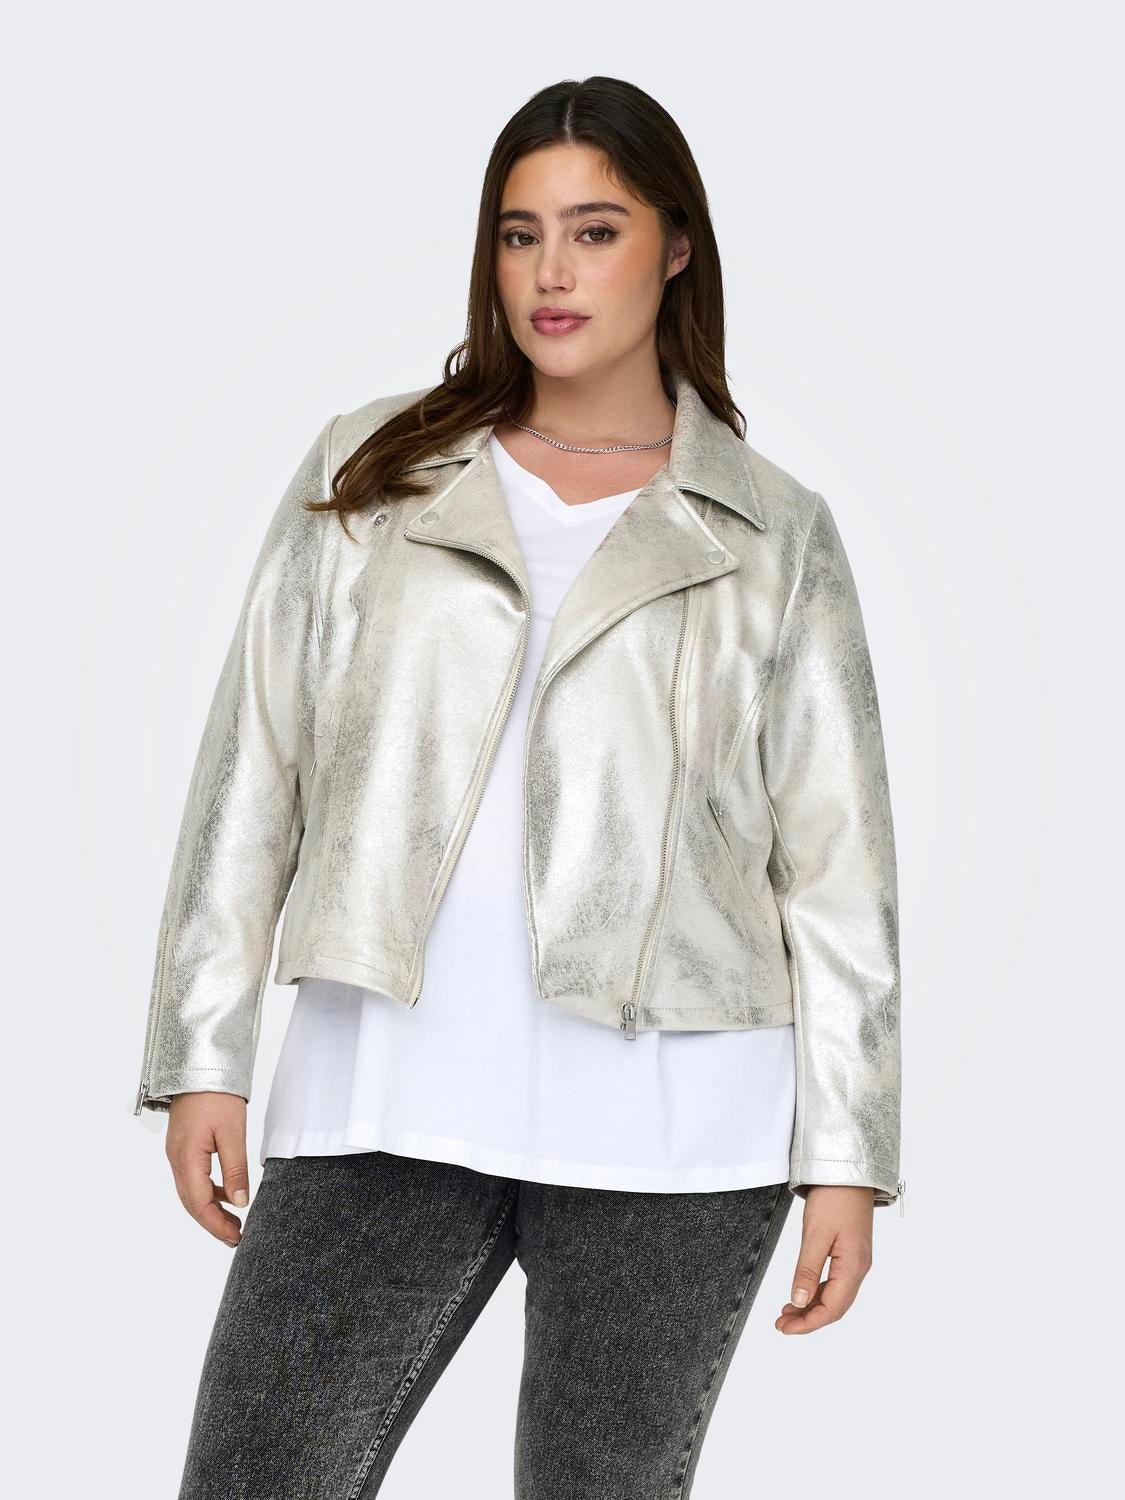 ONLY curvy faux leather jacket -Pumice Stone - 15318024